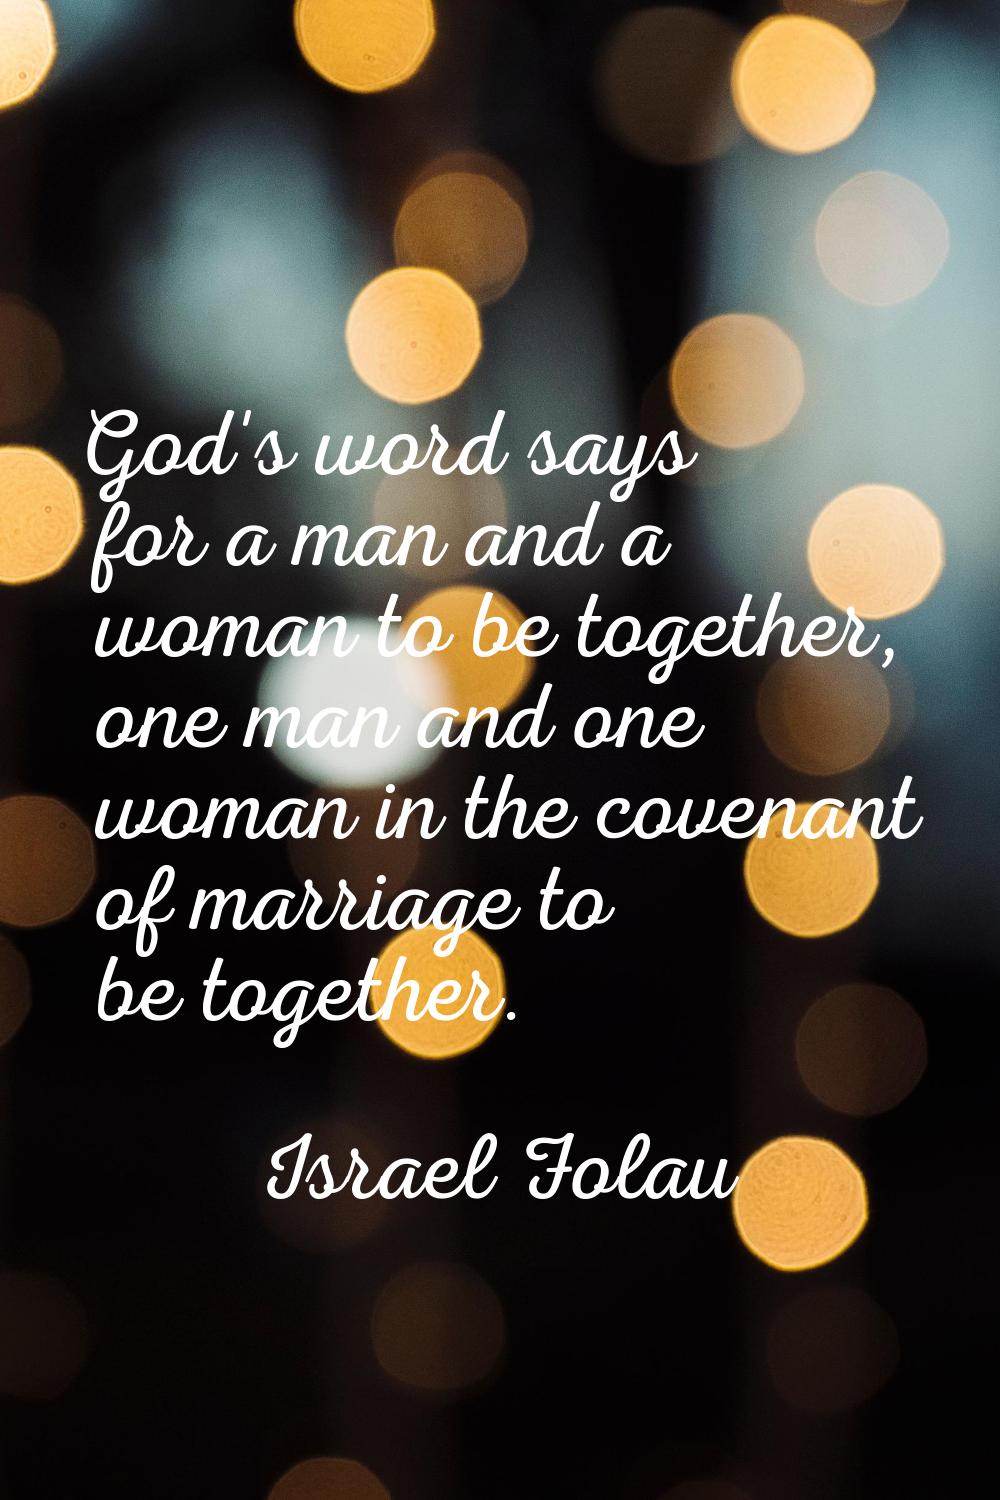 God's word says for a man and a woman to be together, one man and one woman in the covenant of marr